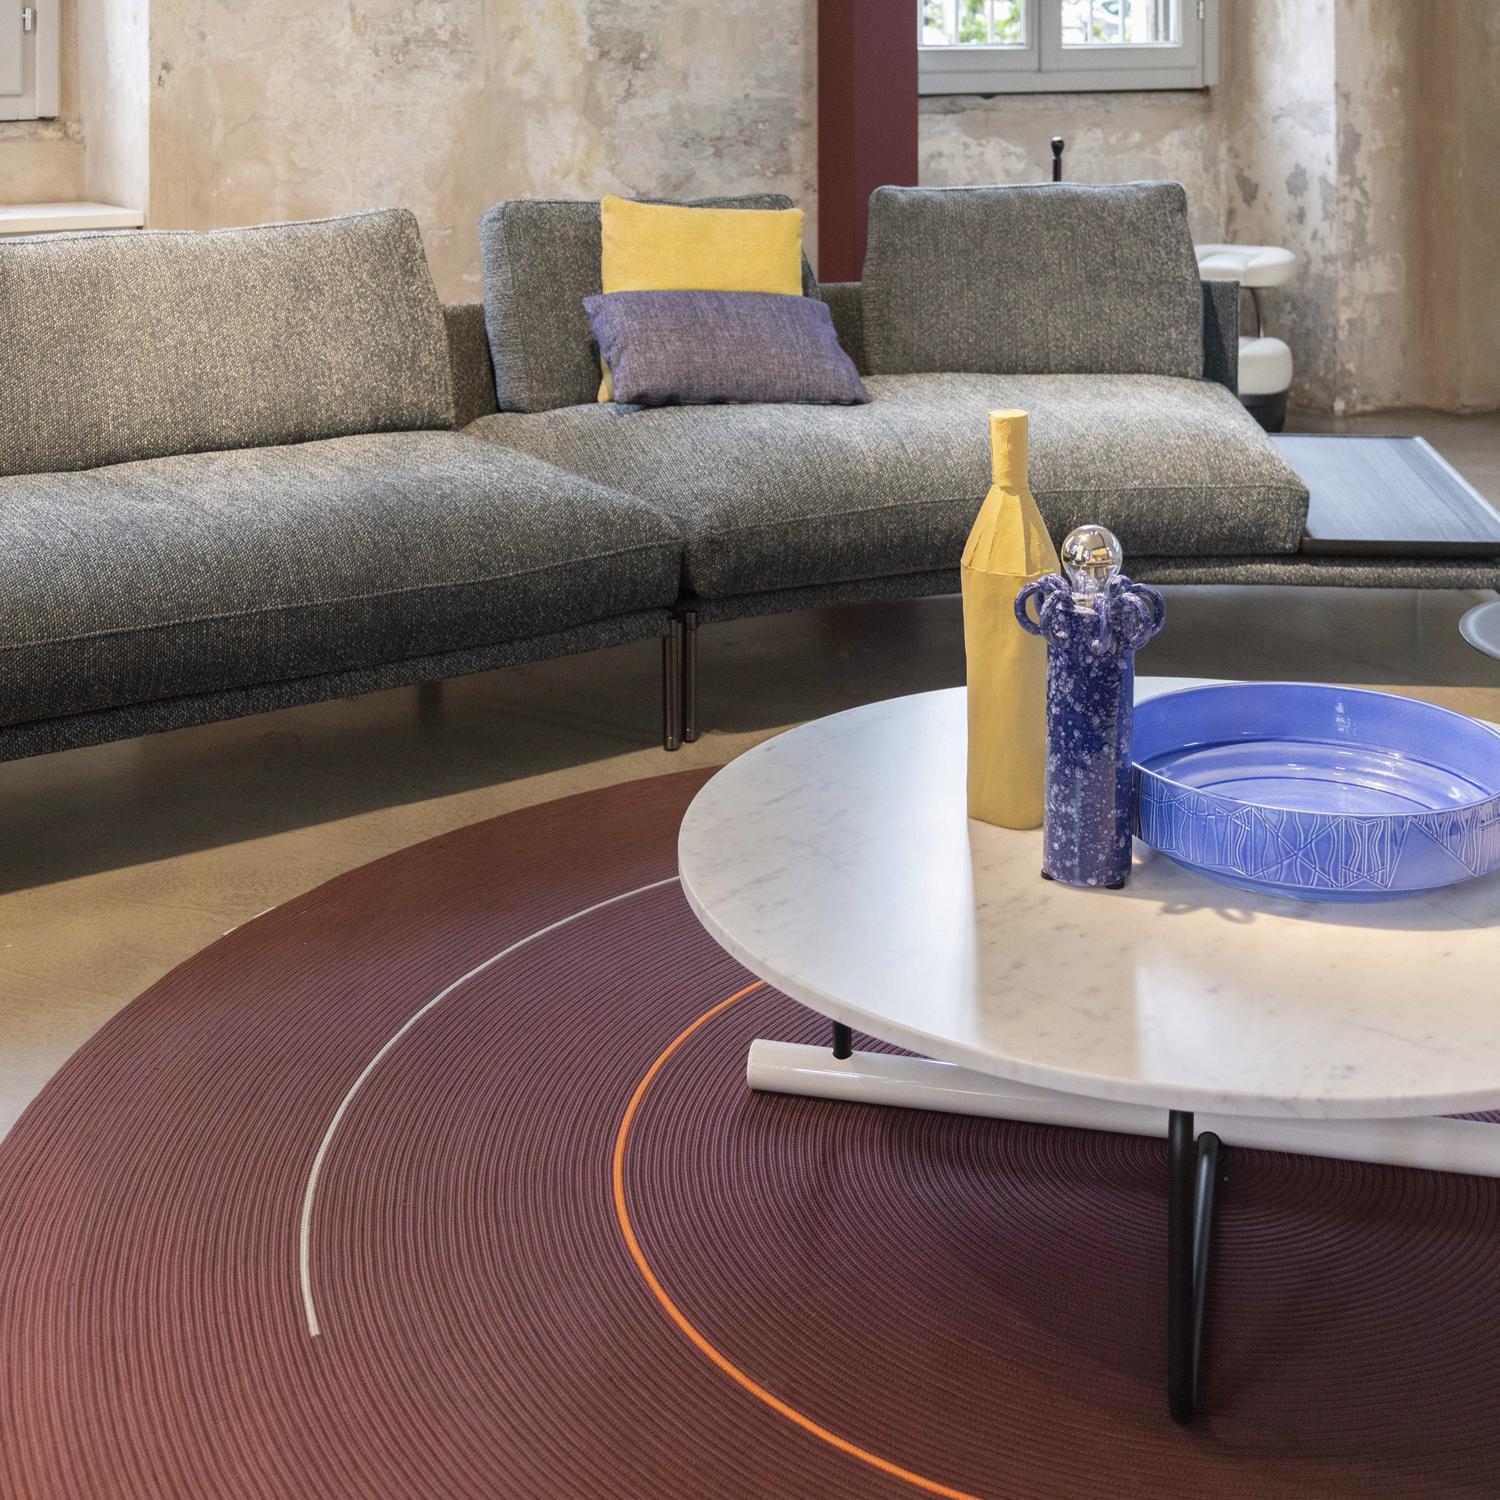 Hula Hoop is a new collection of minimal contemporary rugs suitable for both in and outdoor spaces designed by Deanna Comellini, founder and art director of Italian brand G.T.DESIGN, pioneer in the field of contemporary rugs.

The series of circular